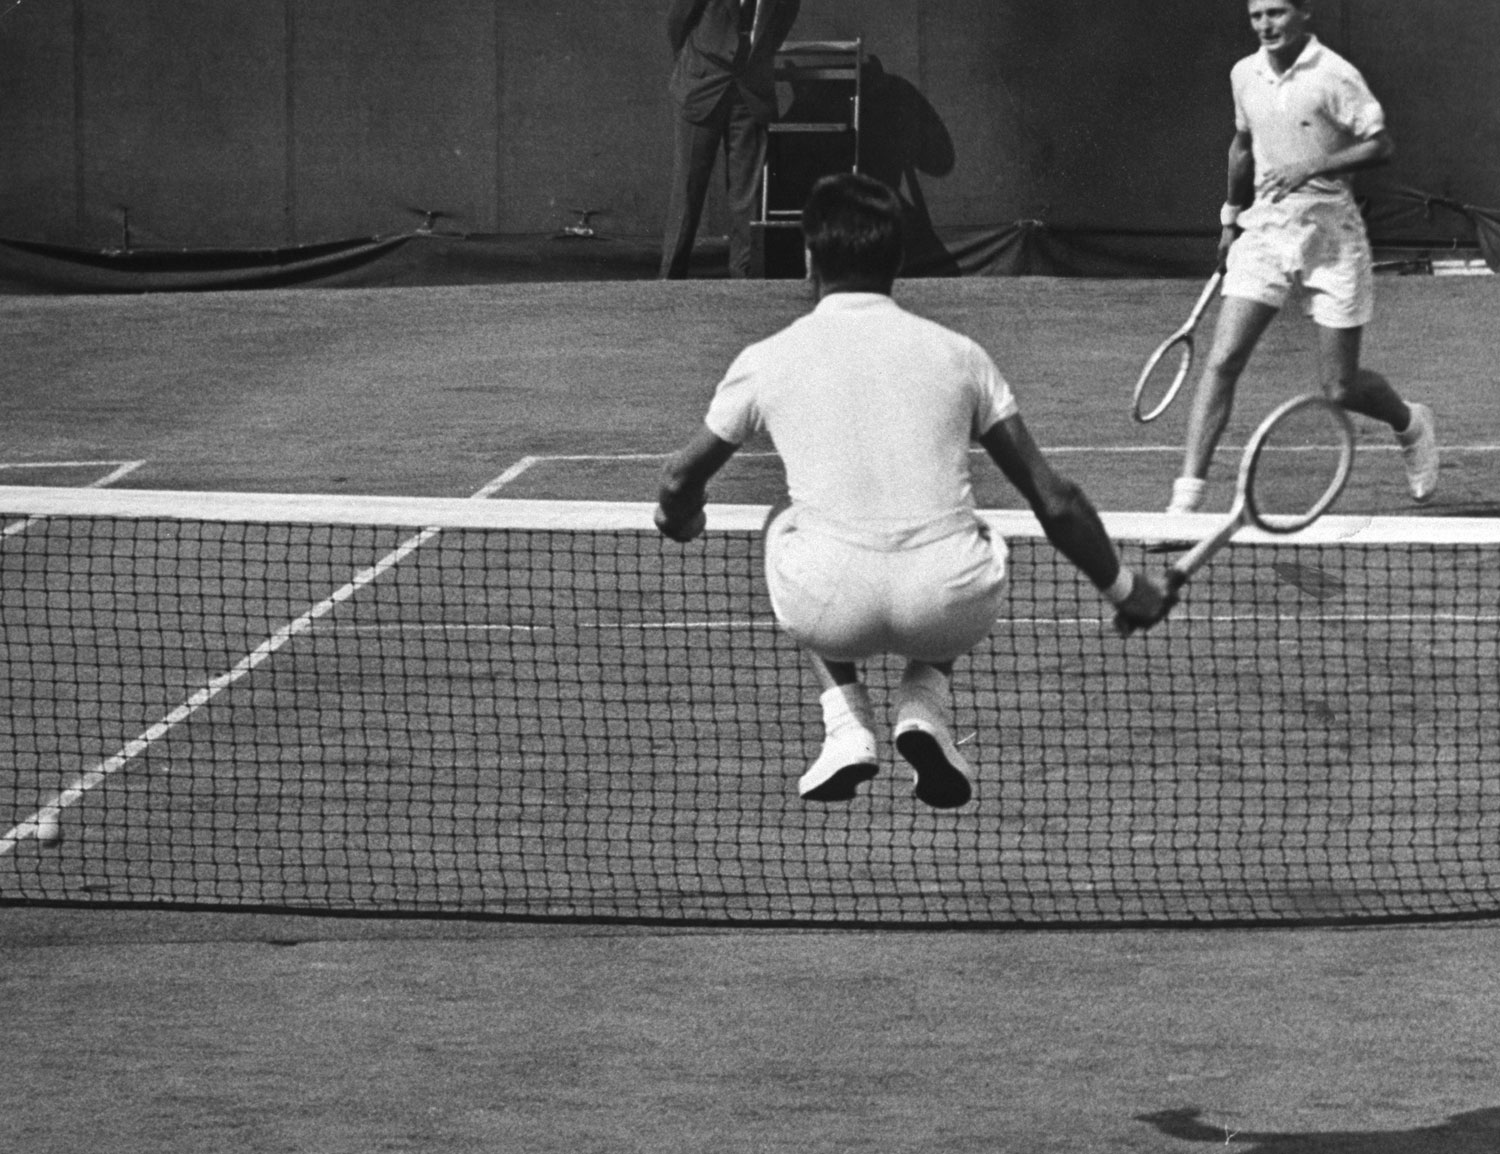 National Tennis Championships at Forest Hills, New York, in 1954.